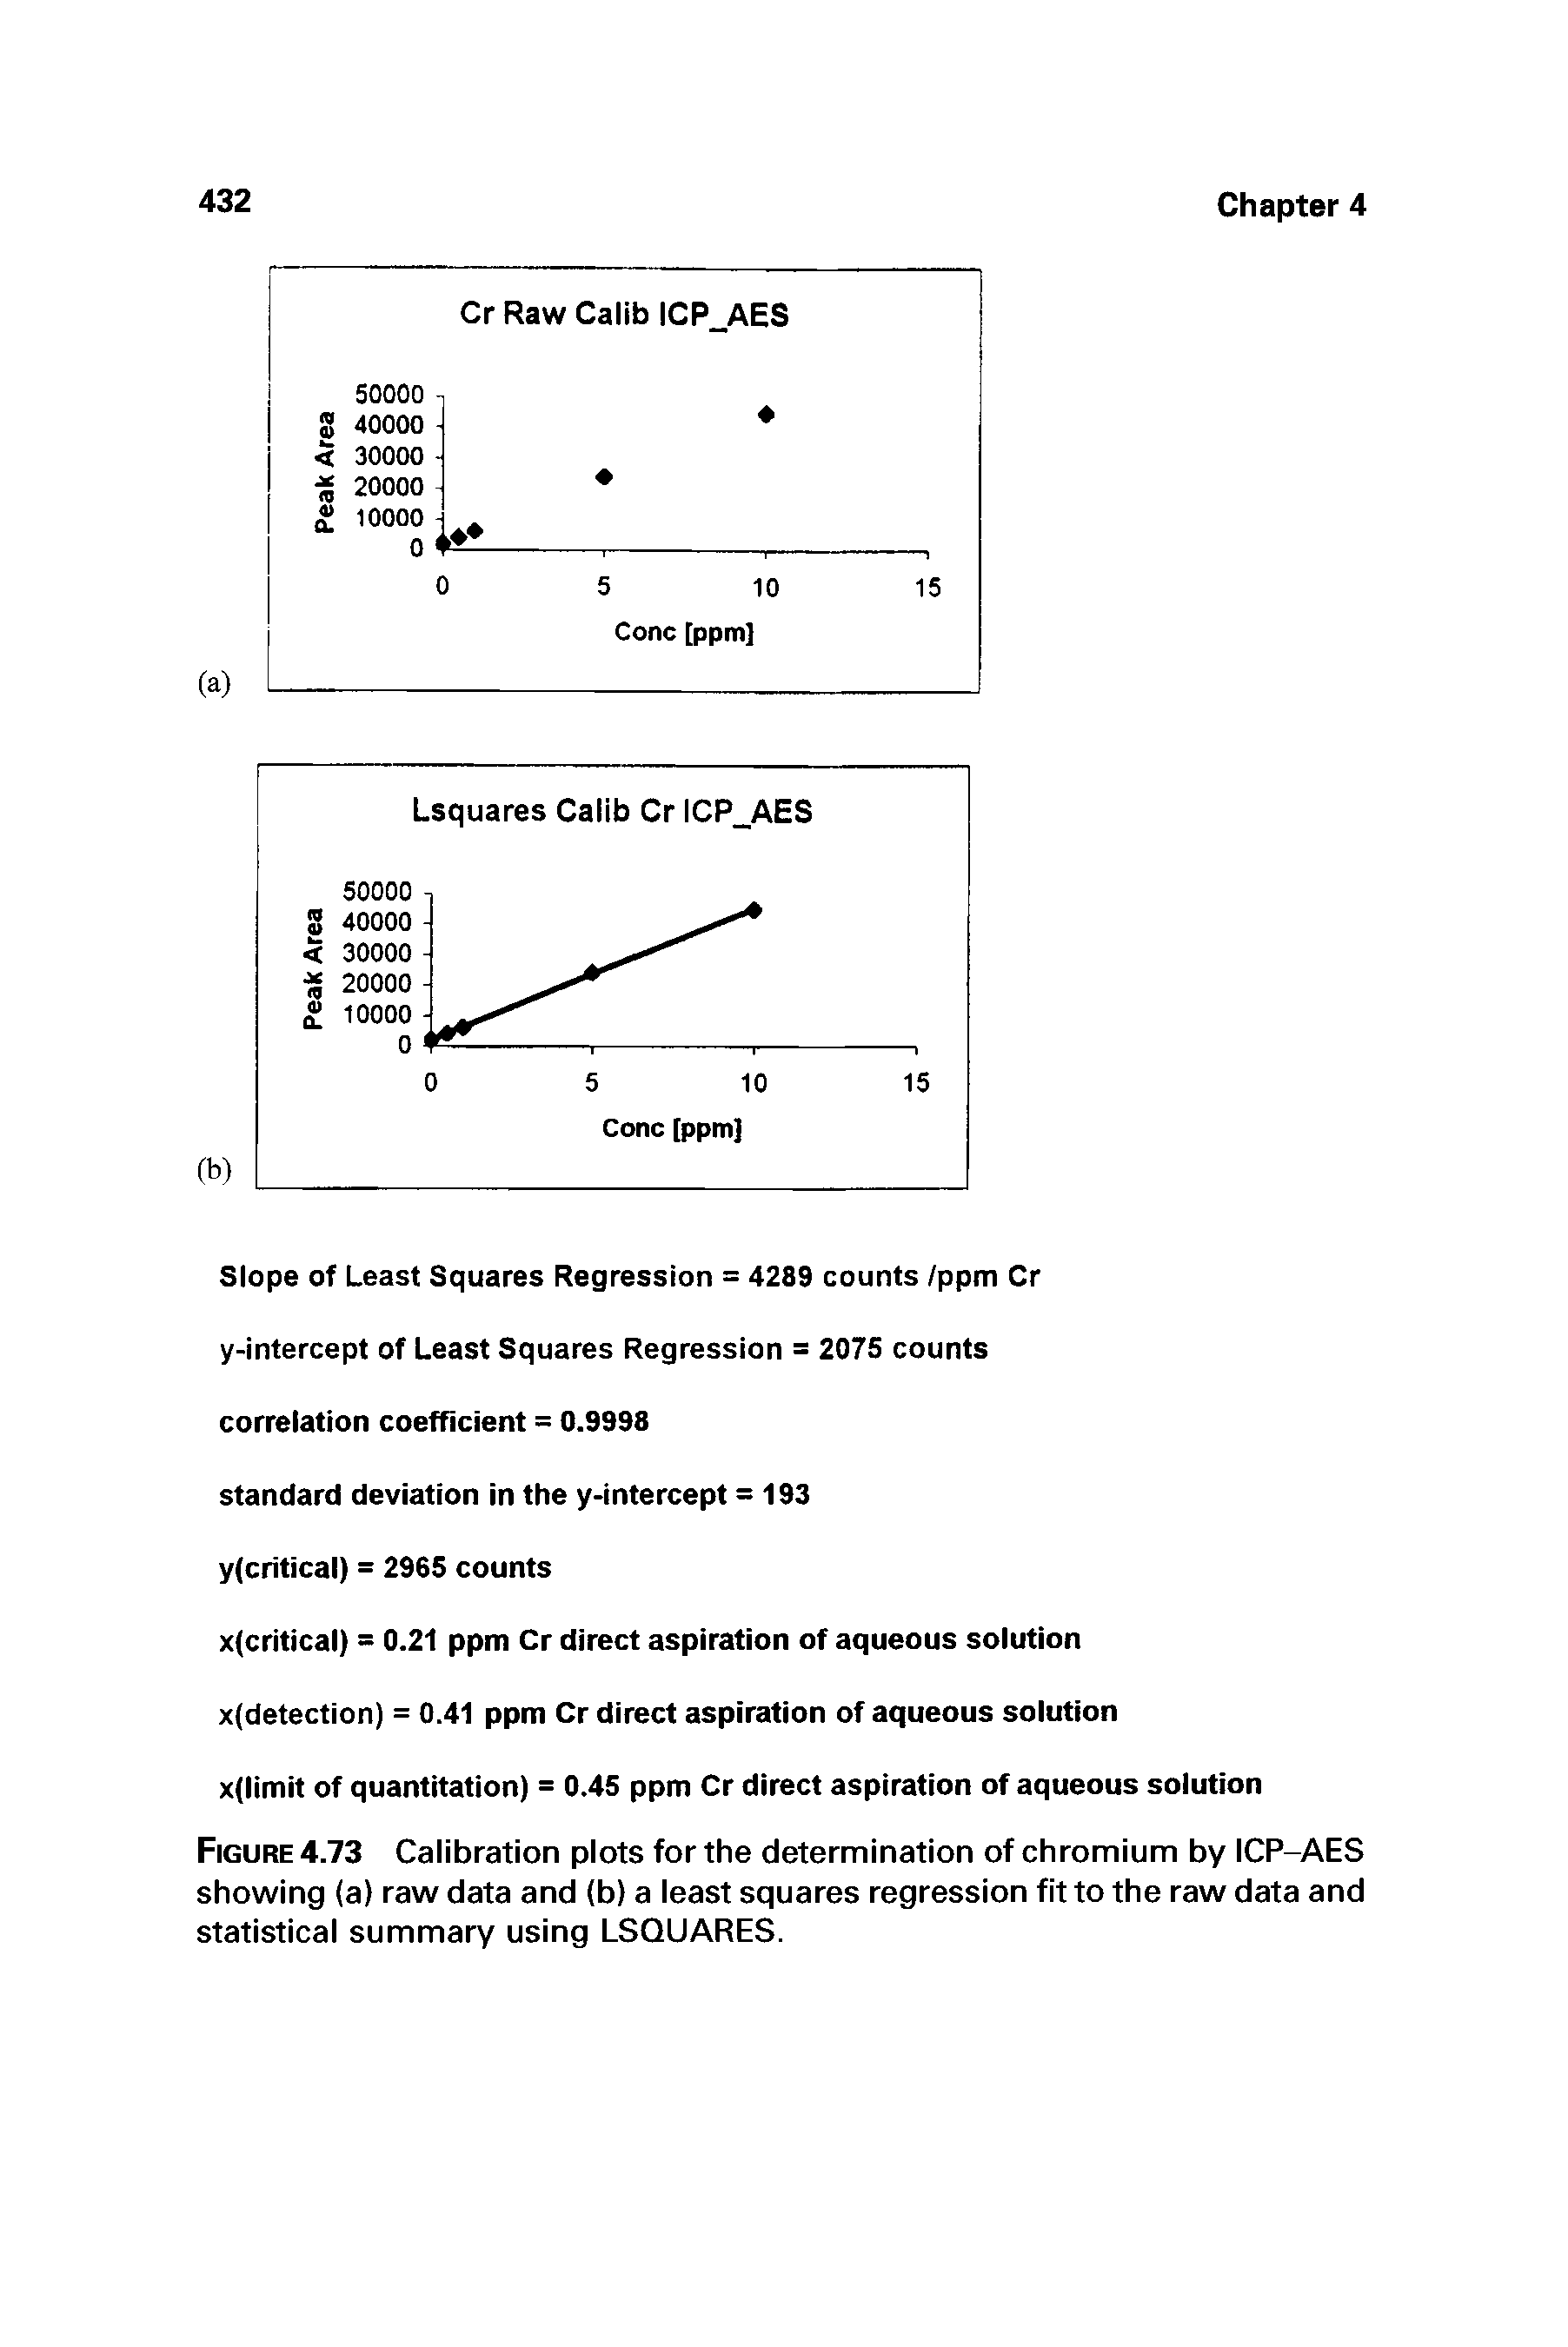 Figure 4.73 Calibration plots for the determination of chromium by ICP-AES showing (a) raw data and (b) a least squares regression fit to the raw data and statistical summary using LSQUARES.